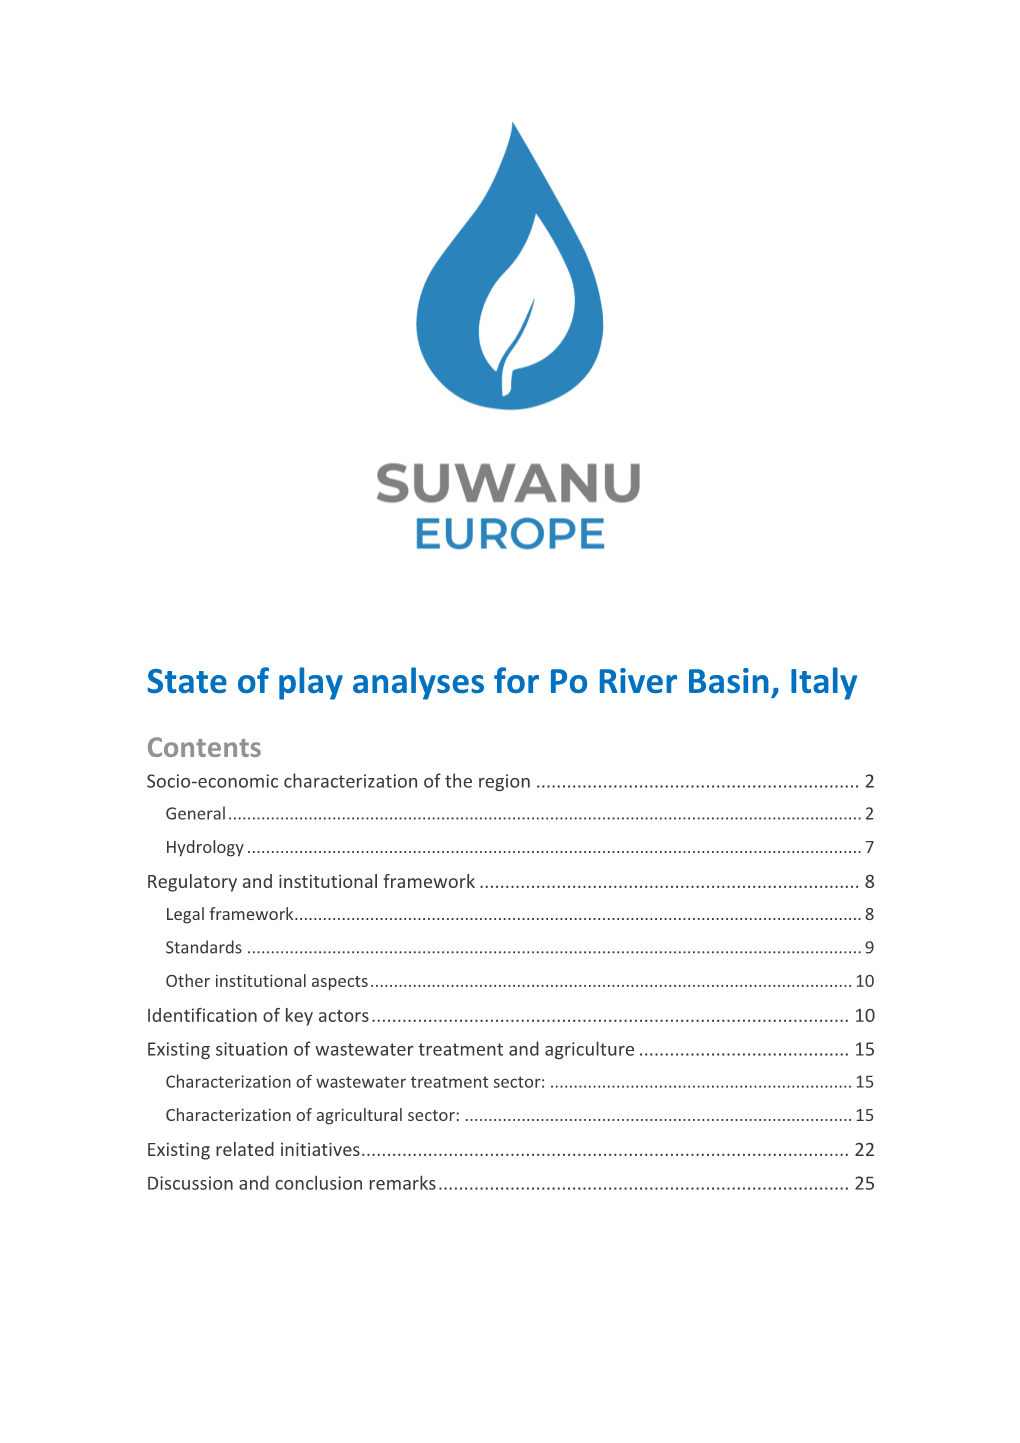 State of Play Analyses for Po River Basin, Italy